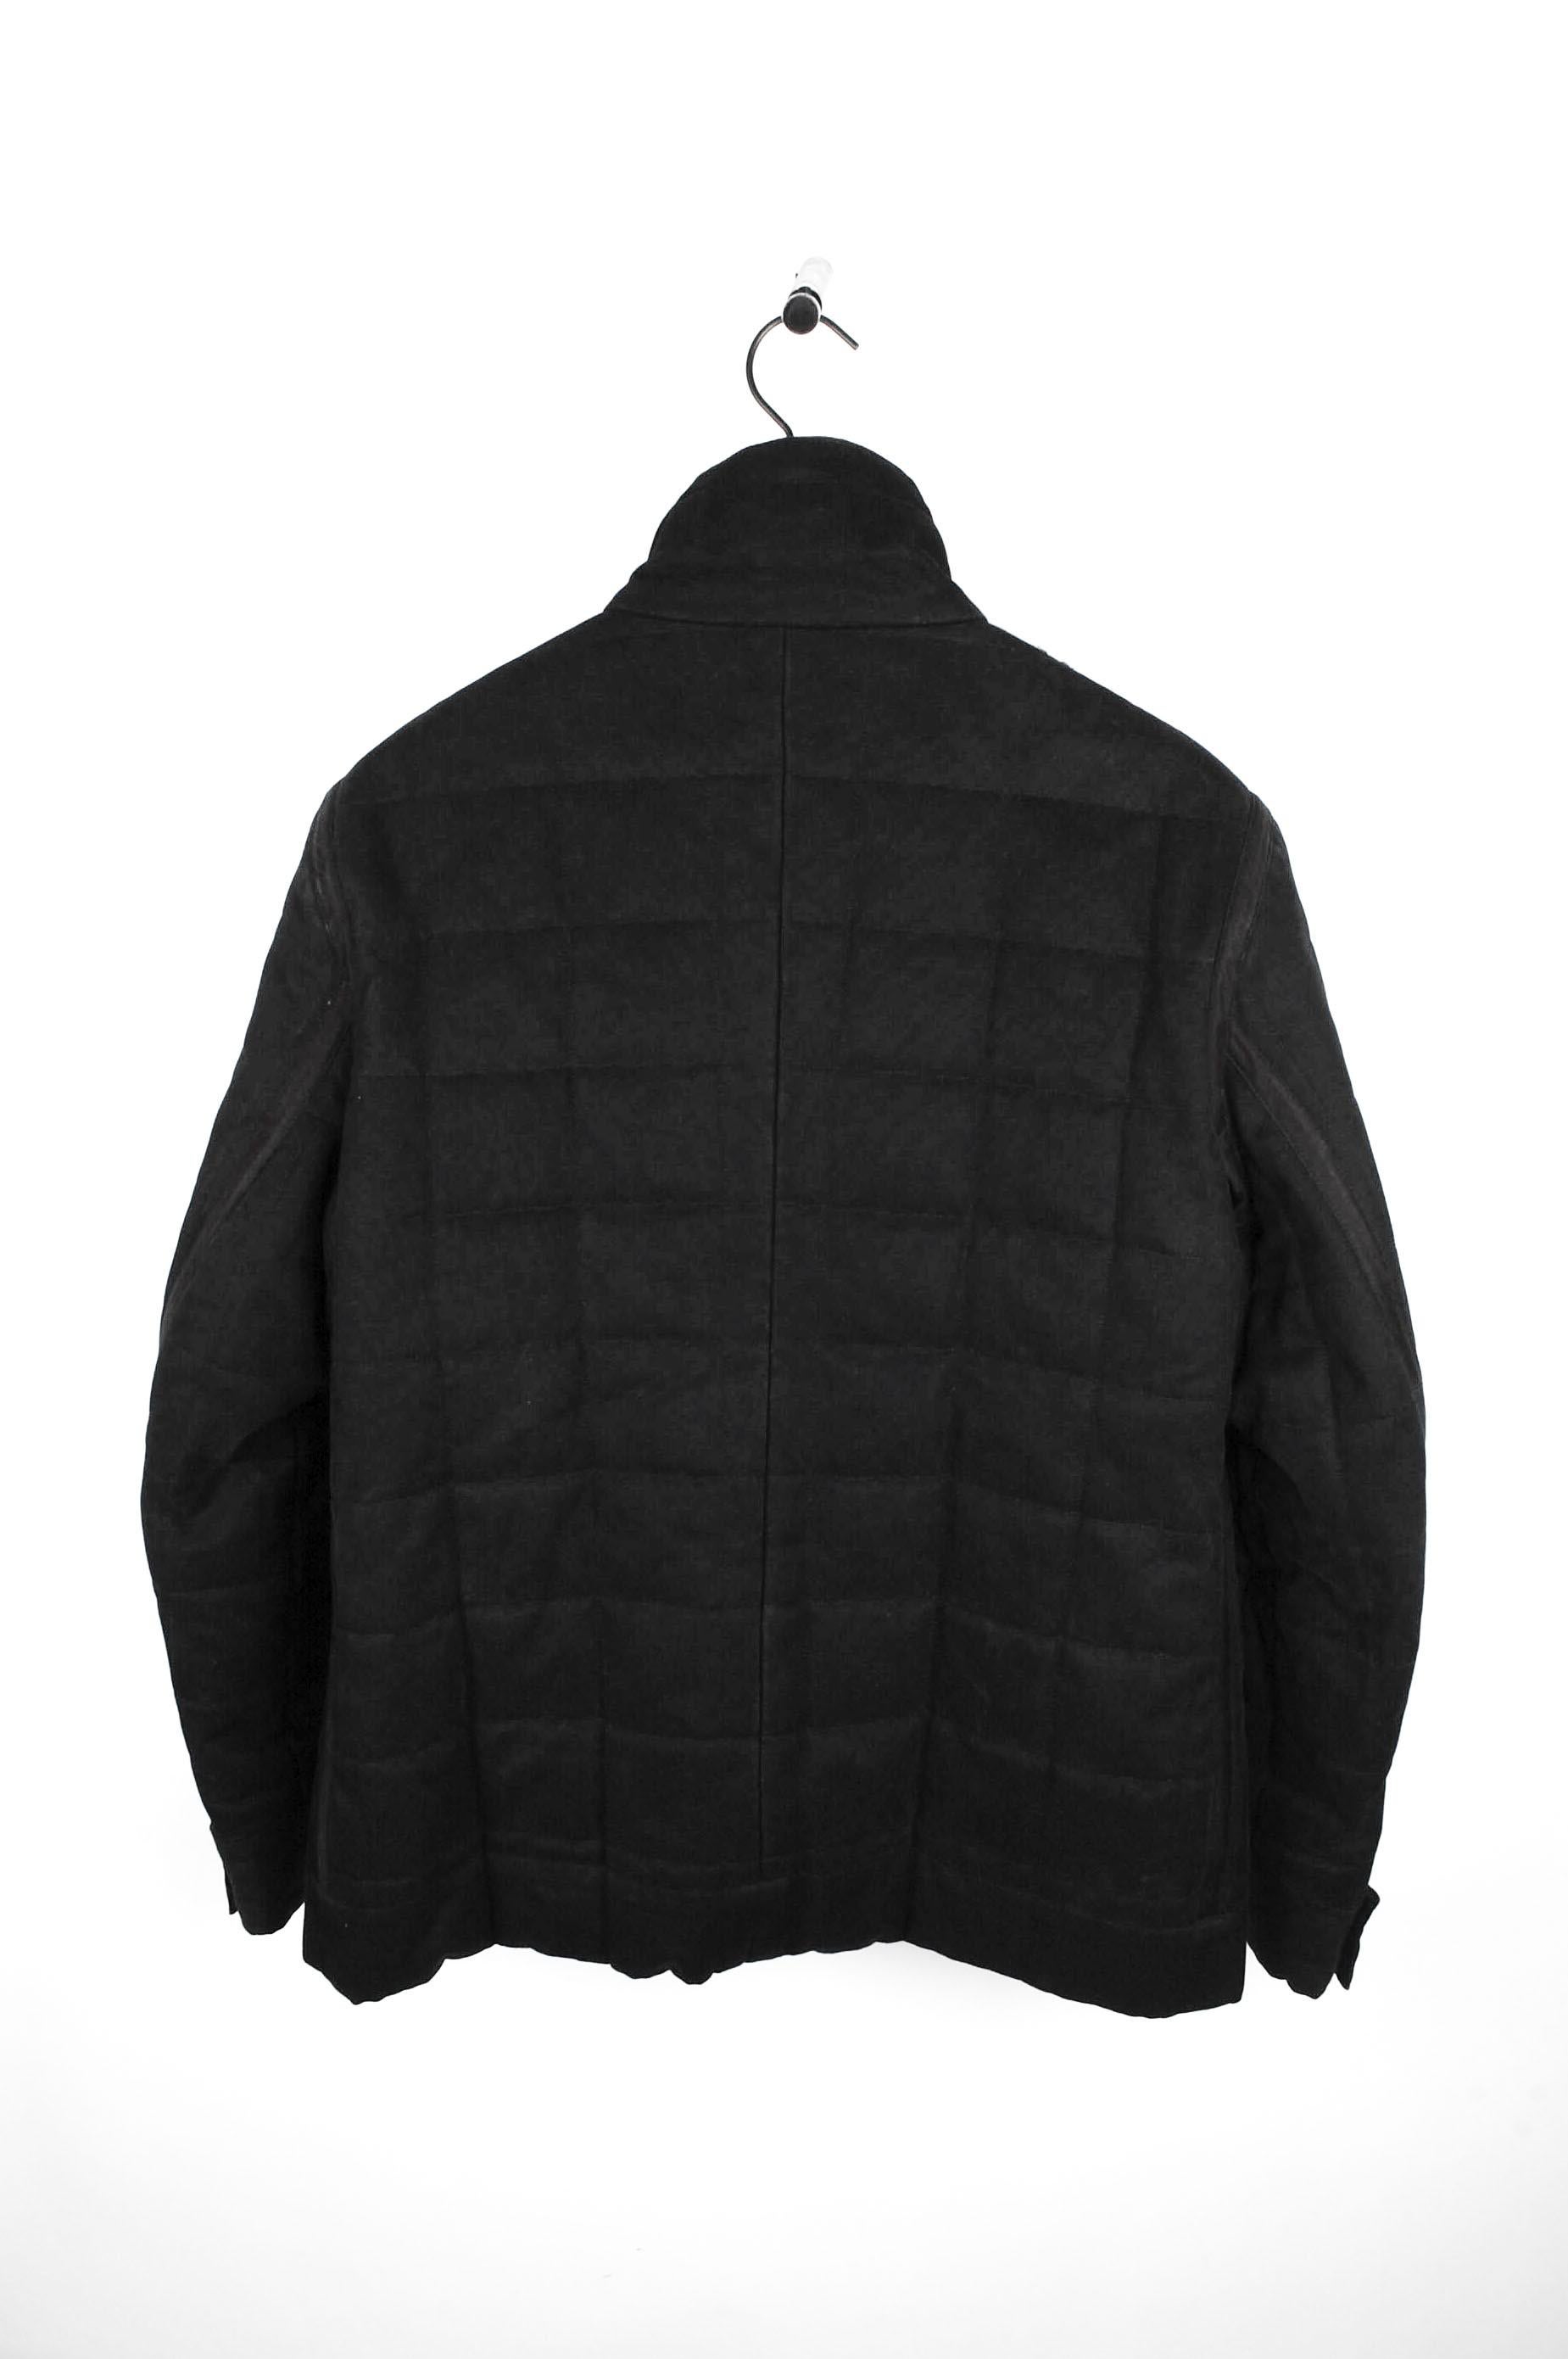 Yves Saint Laurent Rive Gauche Tom Ford Quilted Heavy Men Duty Jacket 52IT In Excellent Condition For Sale In Kaunas, LT